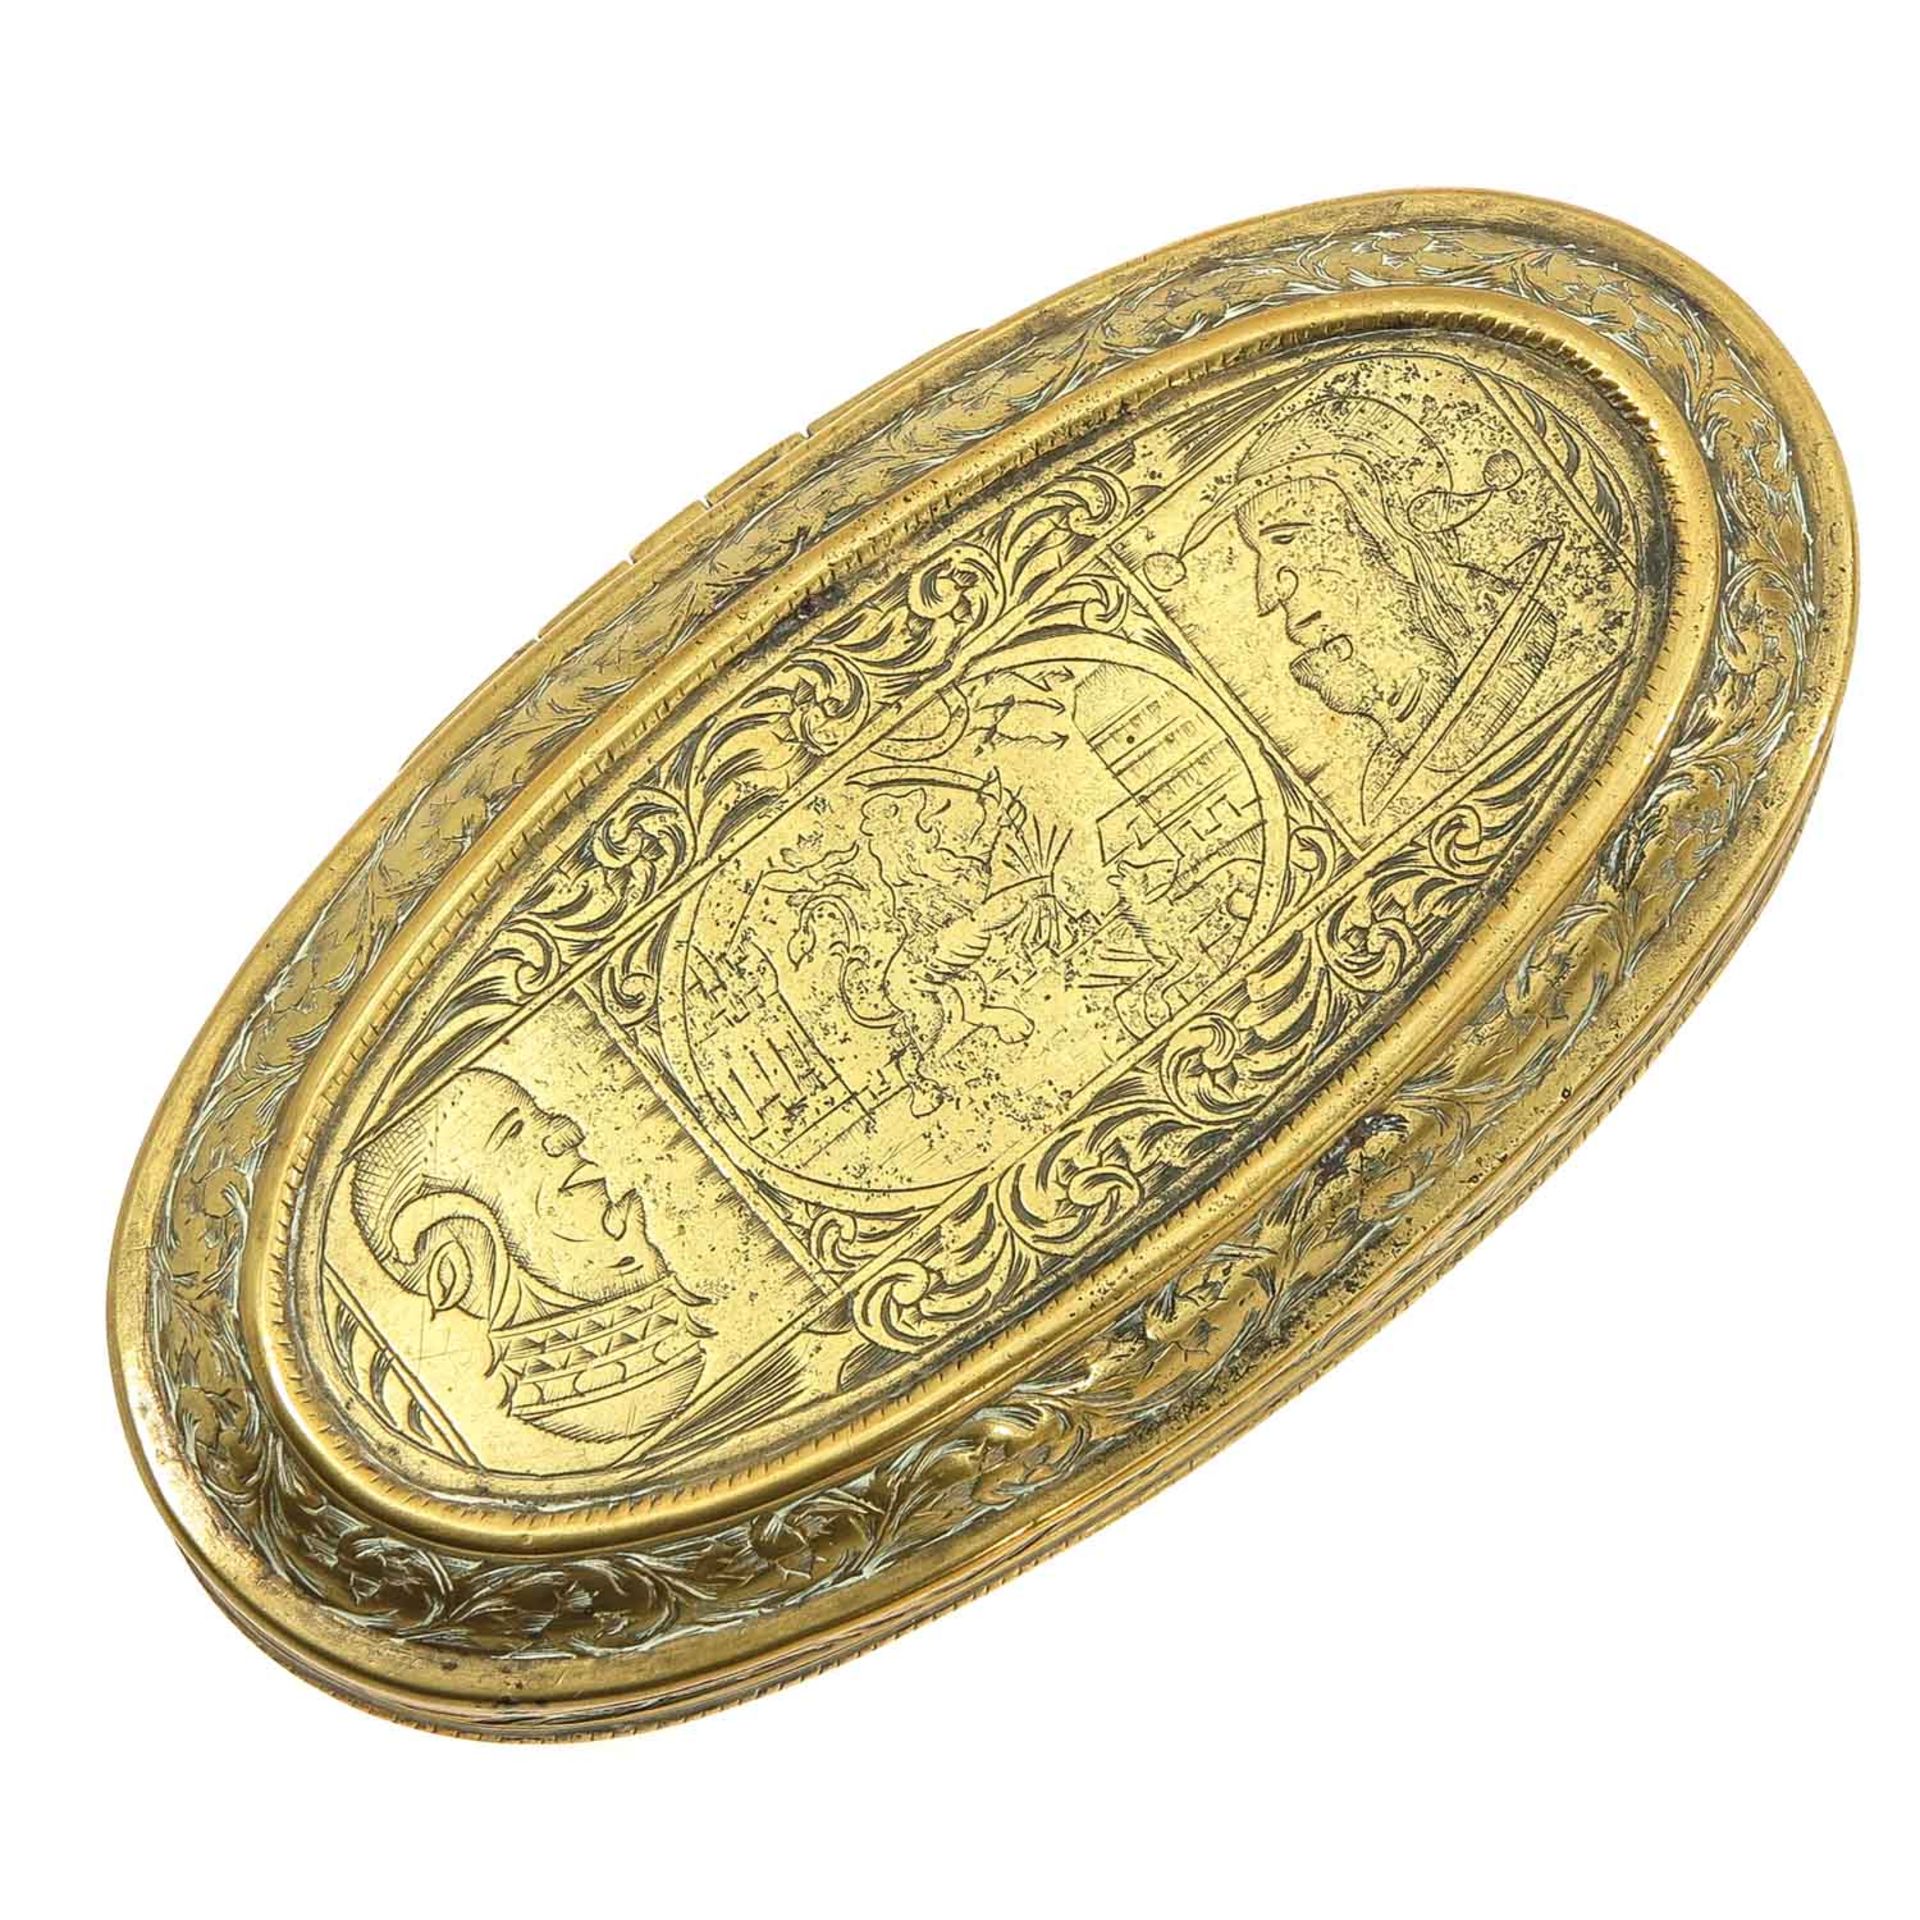 An 18th Century Dutch Oval Tobacco Box - Image 5 of 7